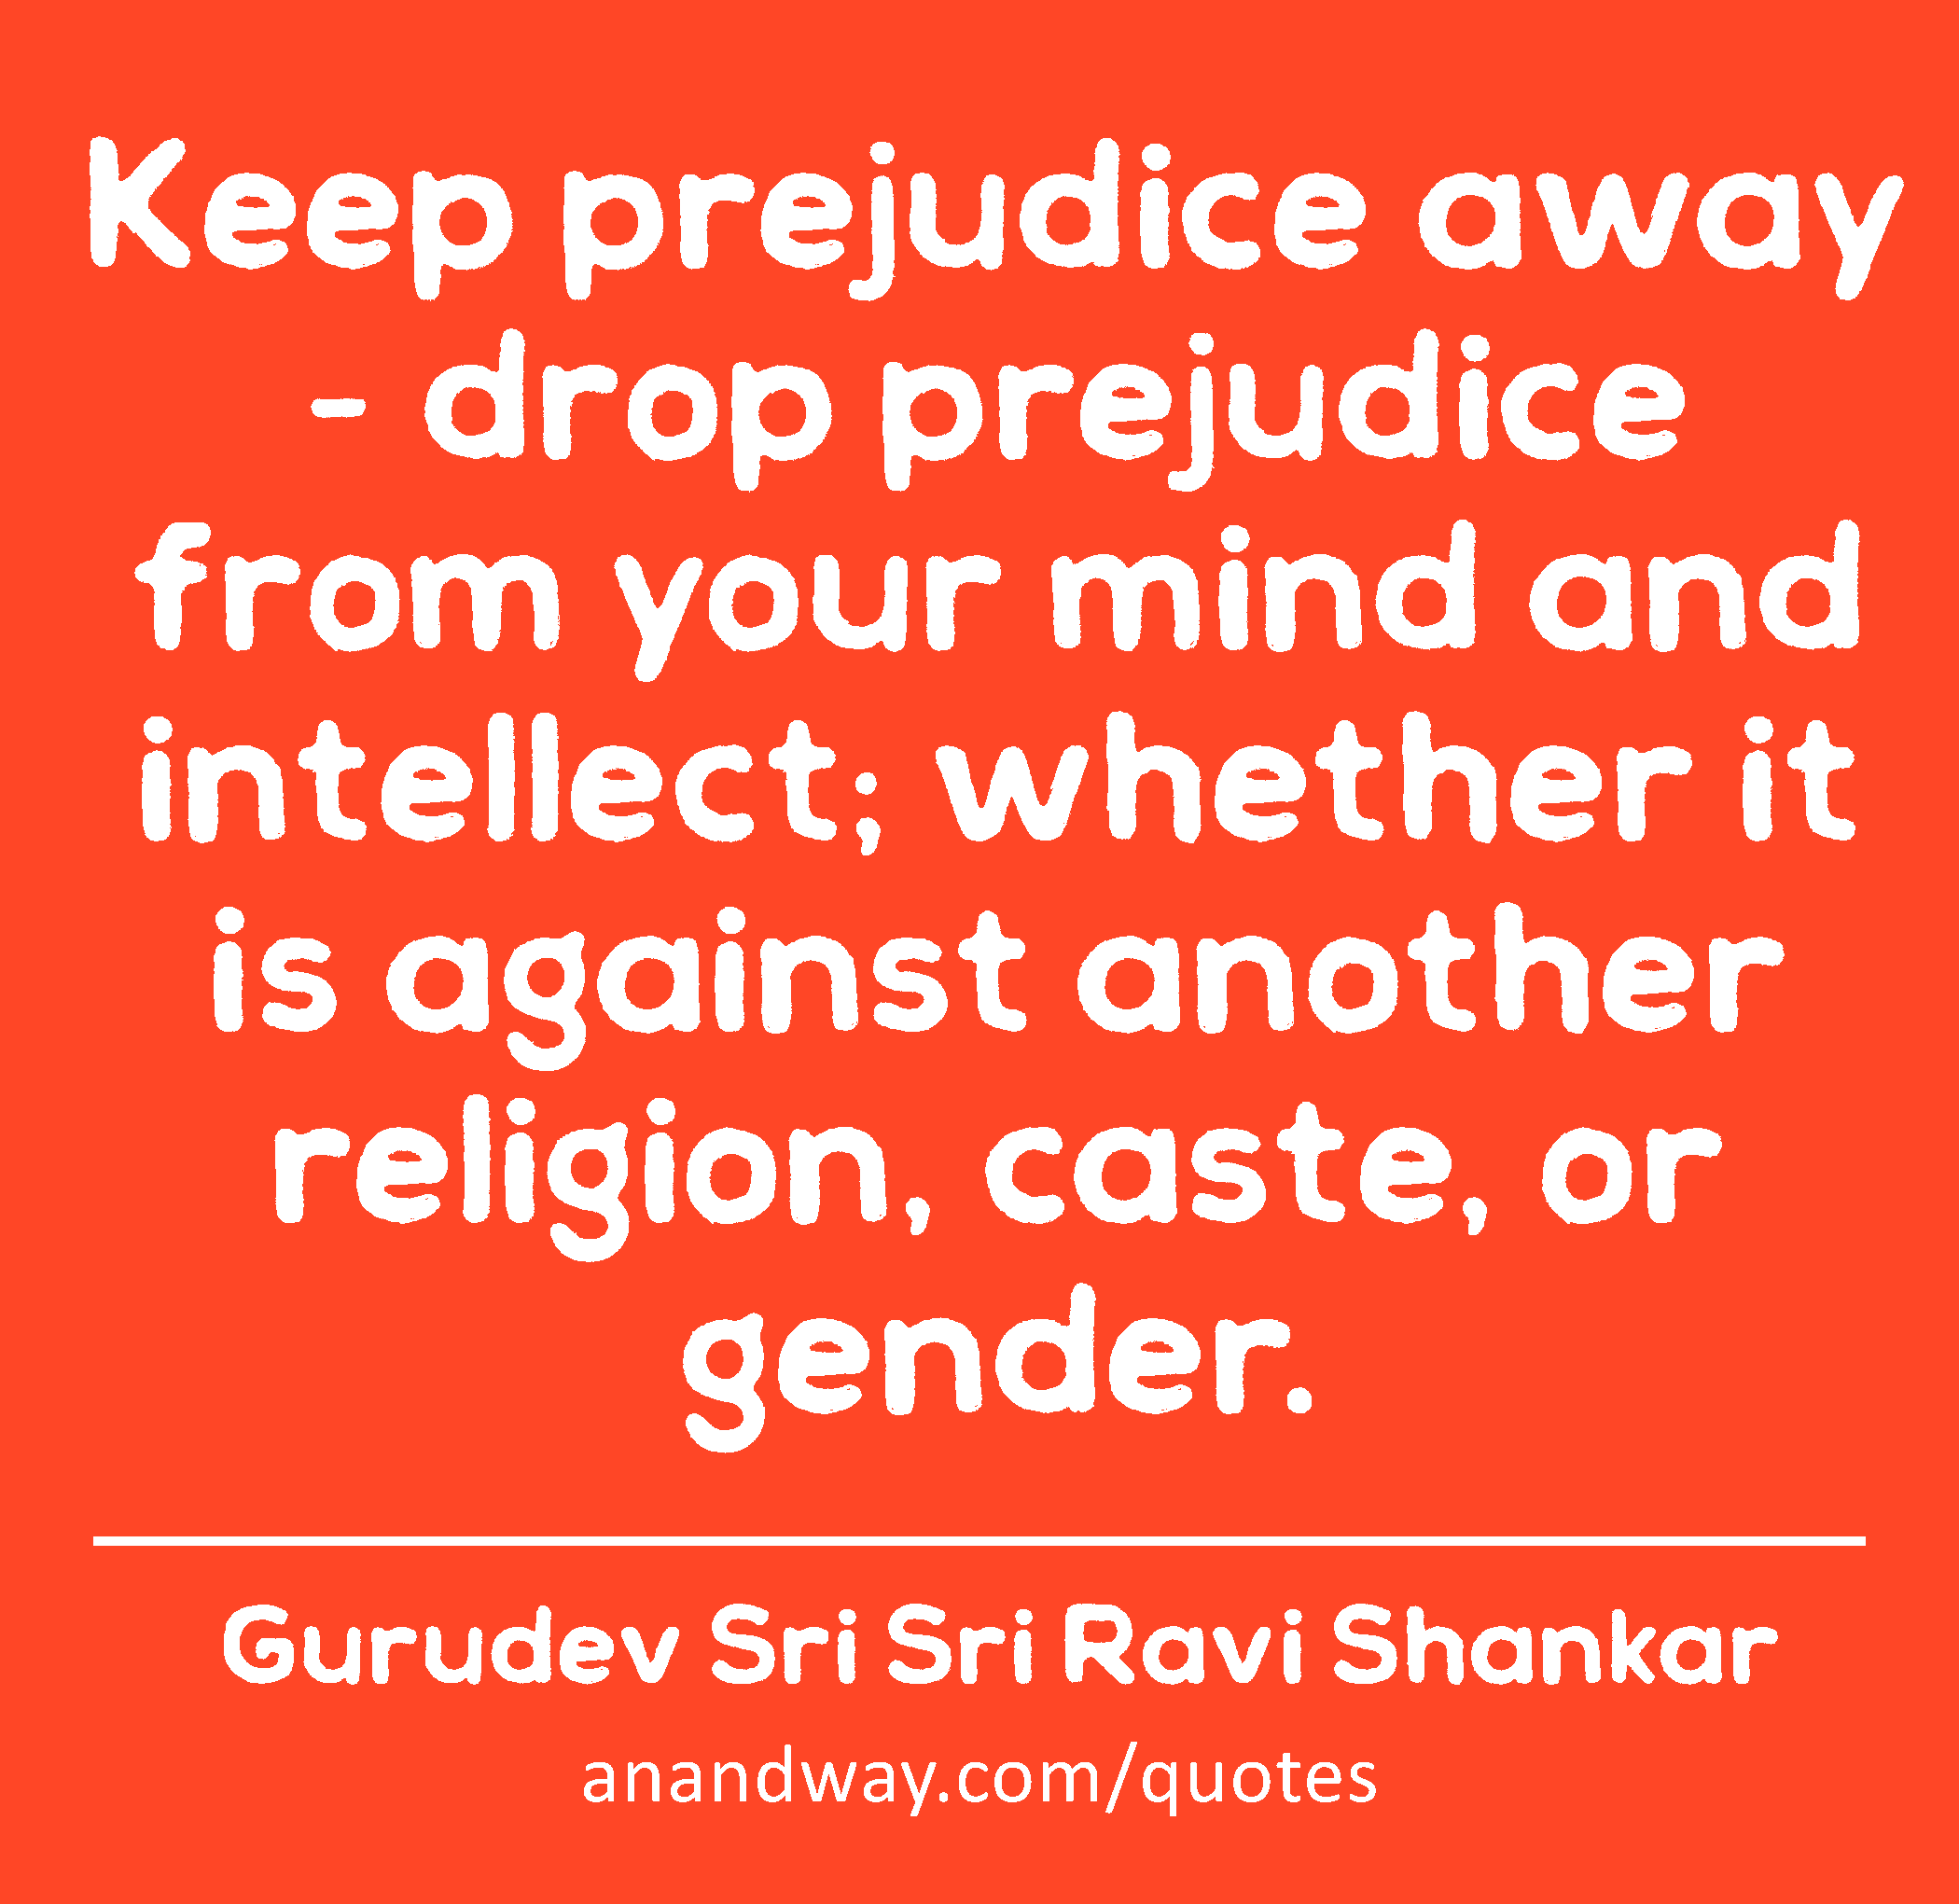 Keep prejudice away - drop prejudice from your mind and intellect; whether it is against another
 -Gurudev Sri Sri Ravi Shankar